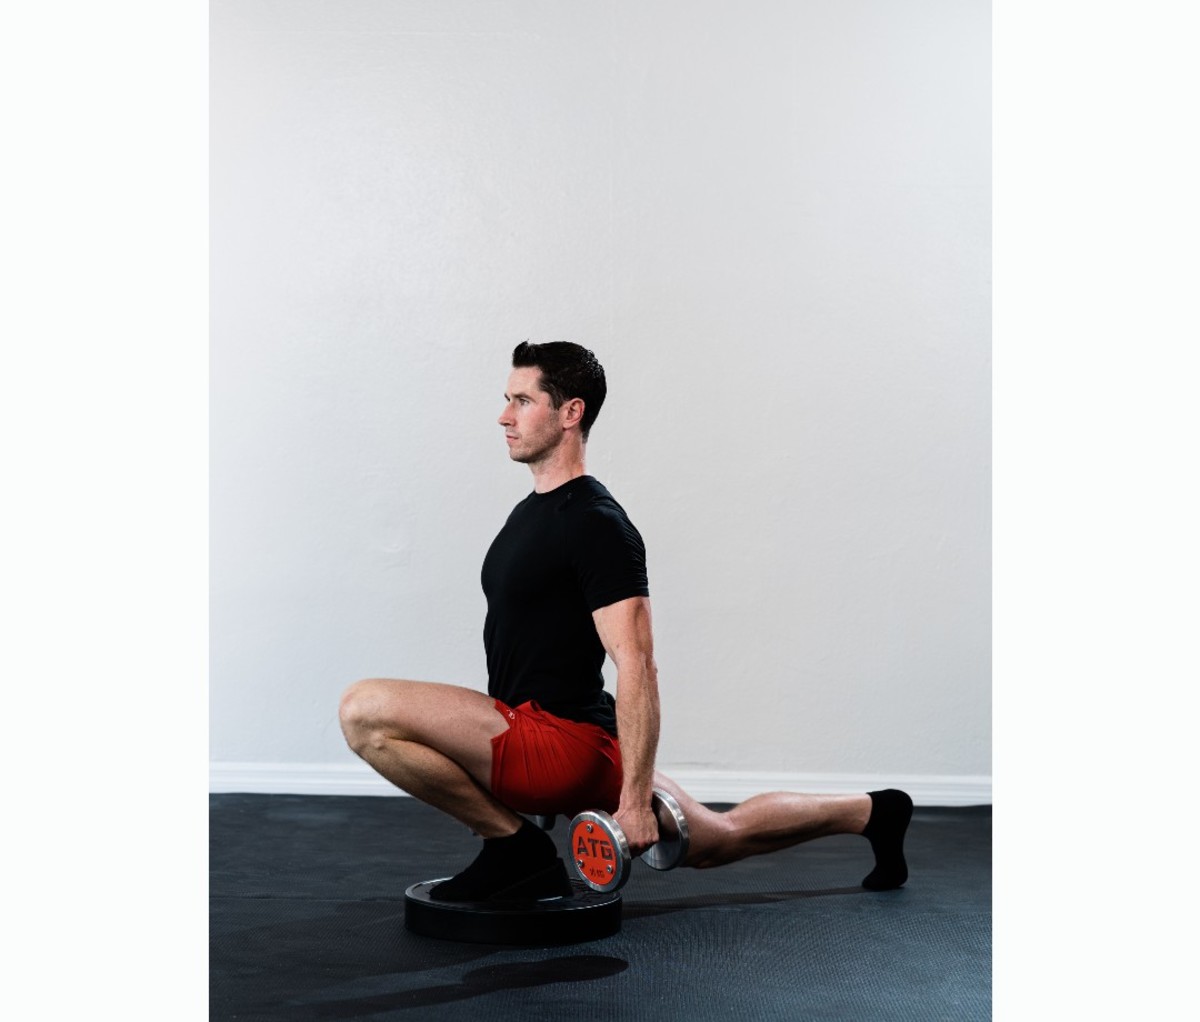 Caucasian man in black T-shirt and red shorts doing exaggerated split squat with dumbbells